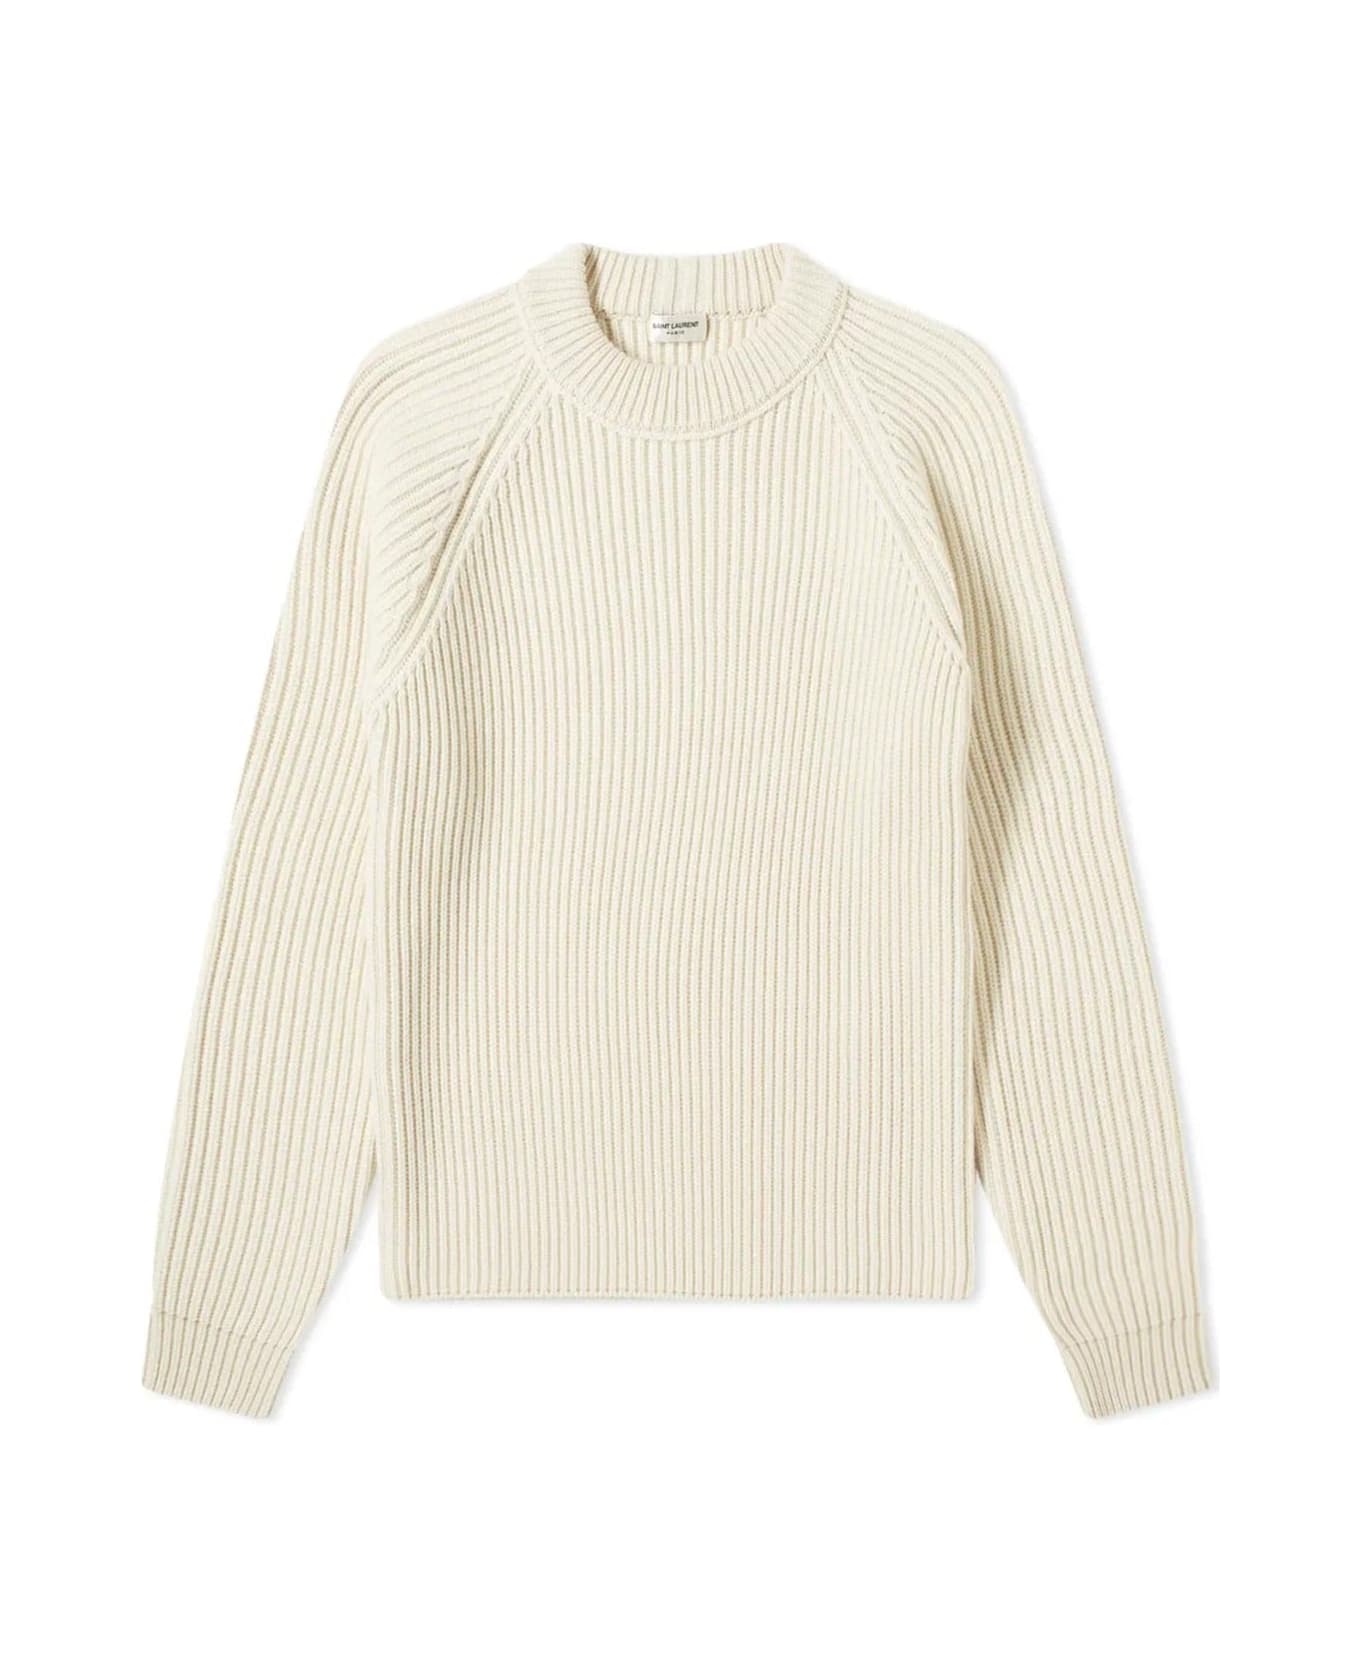 Saint Laurent Wool And Cashmere Sweater - White